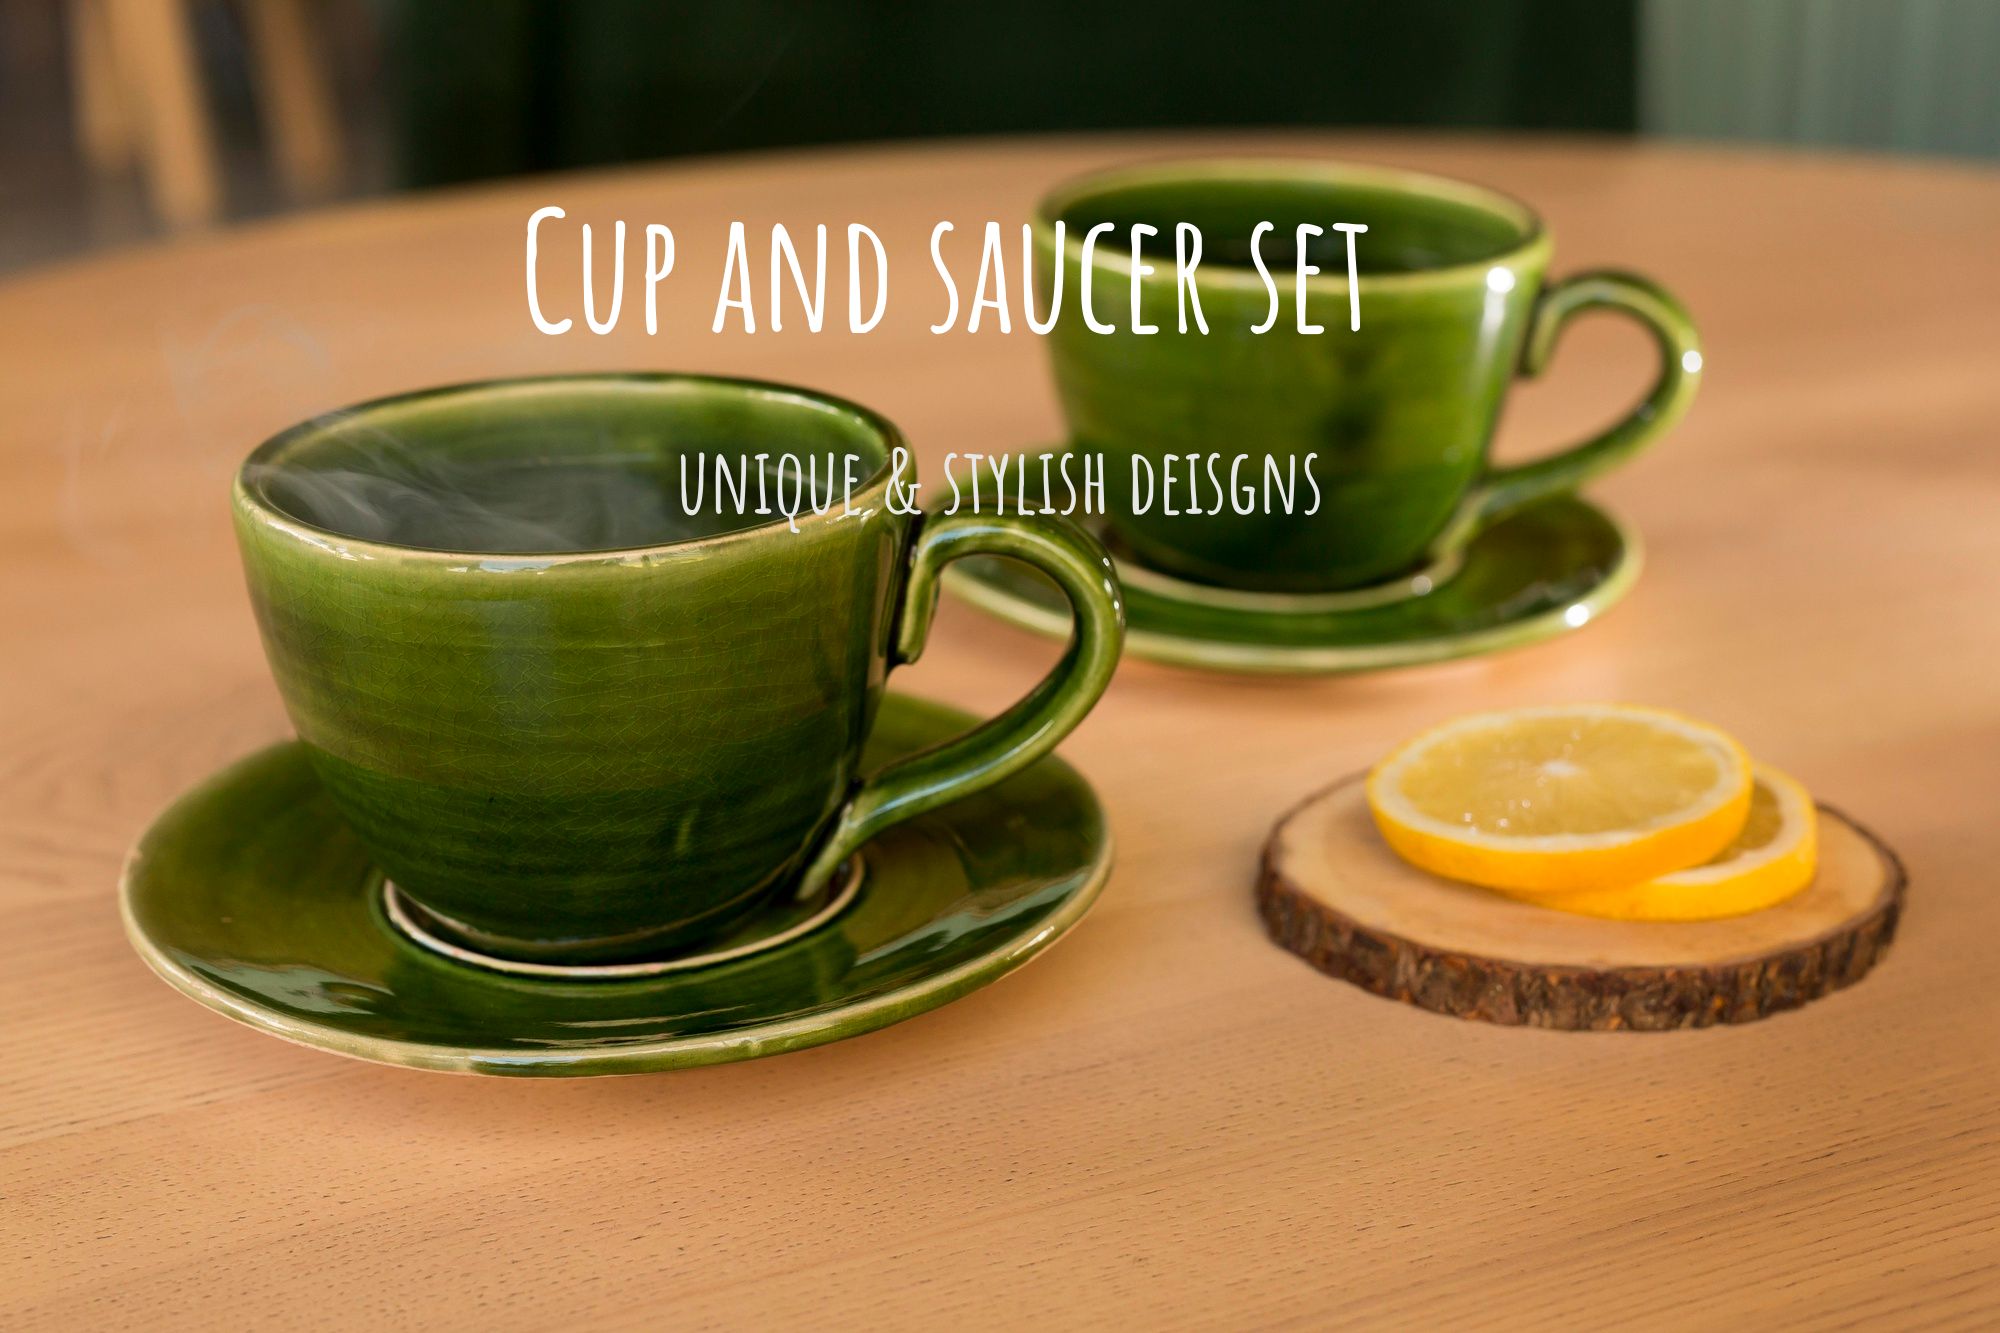 Unique cup and saucer